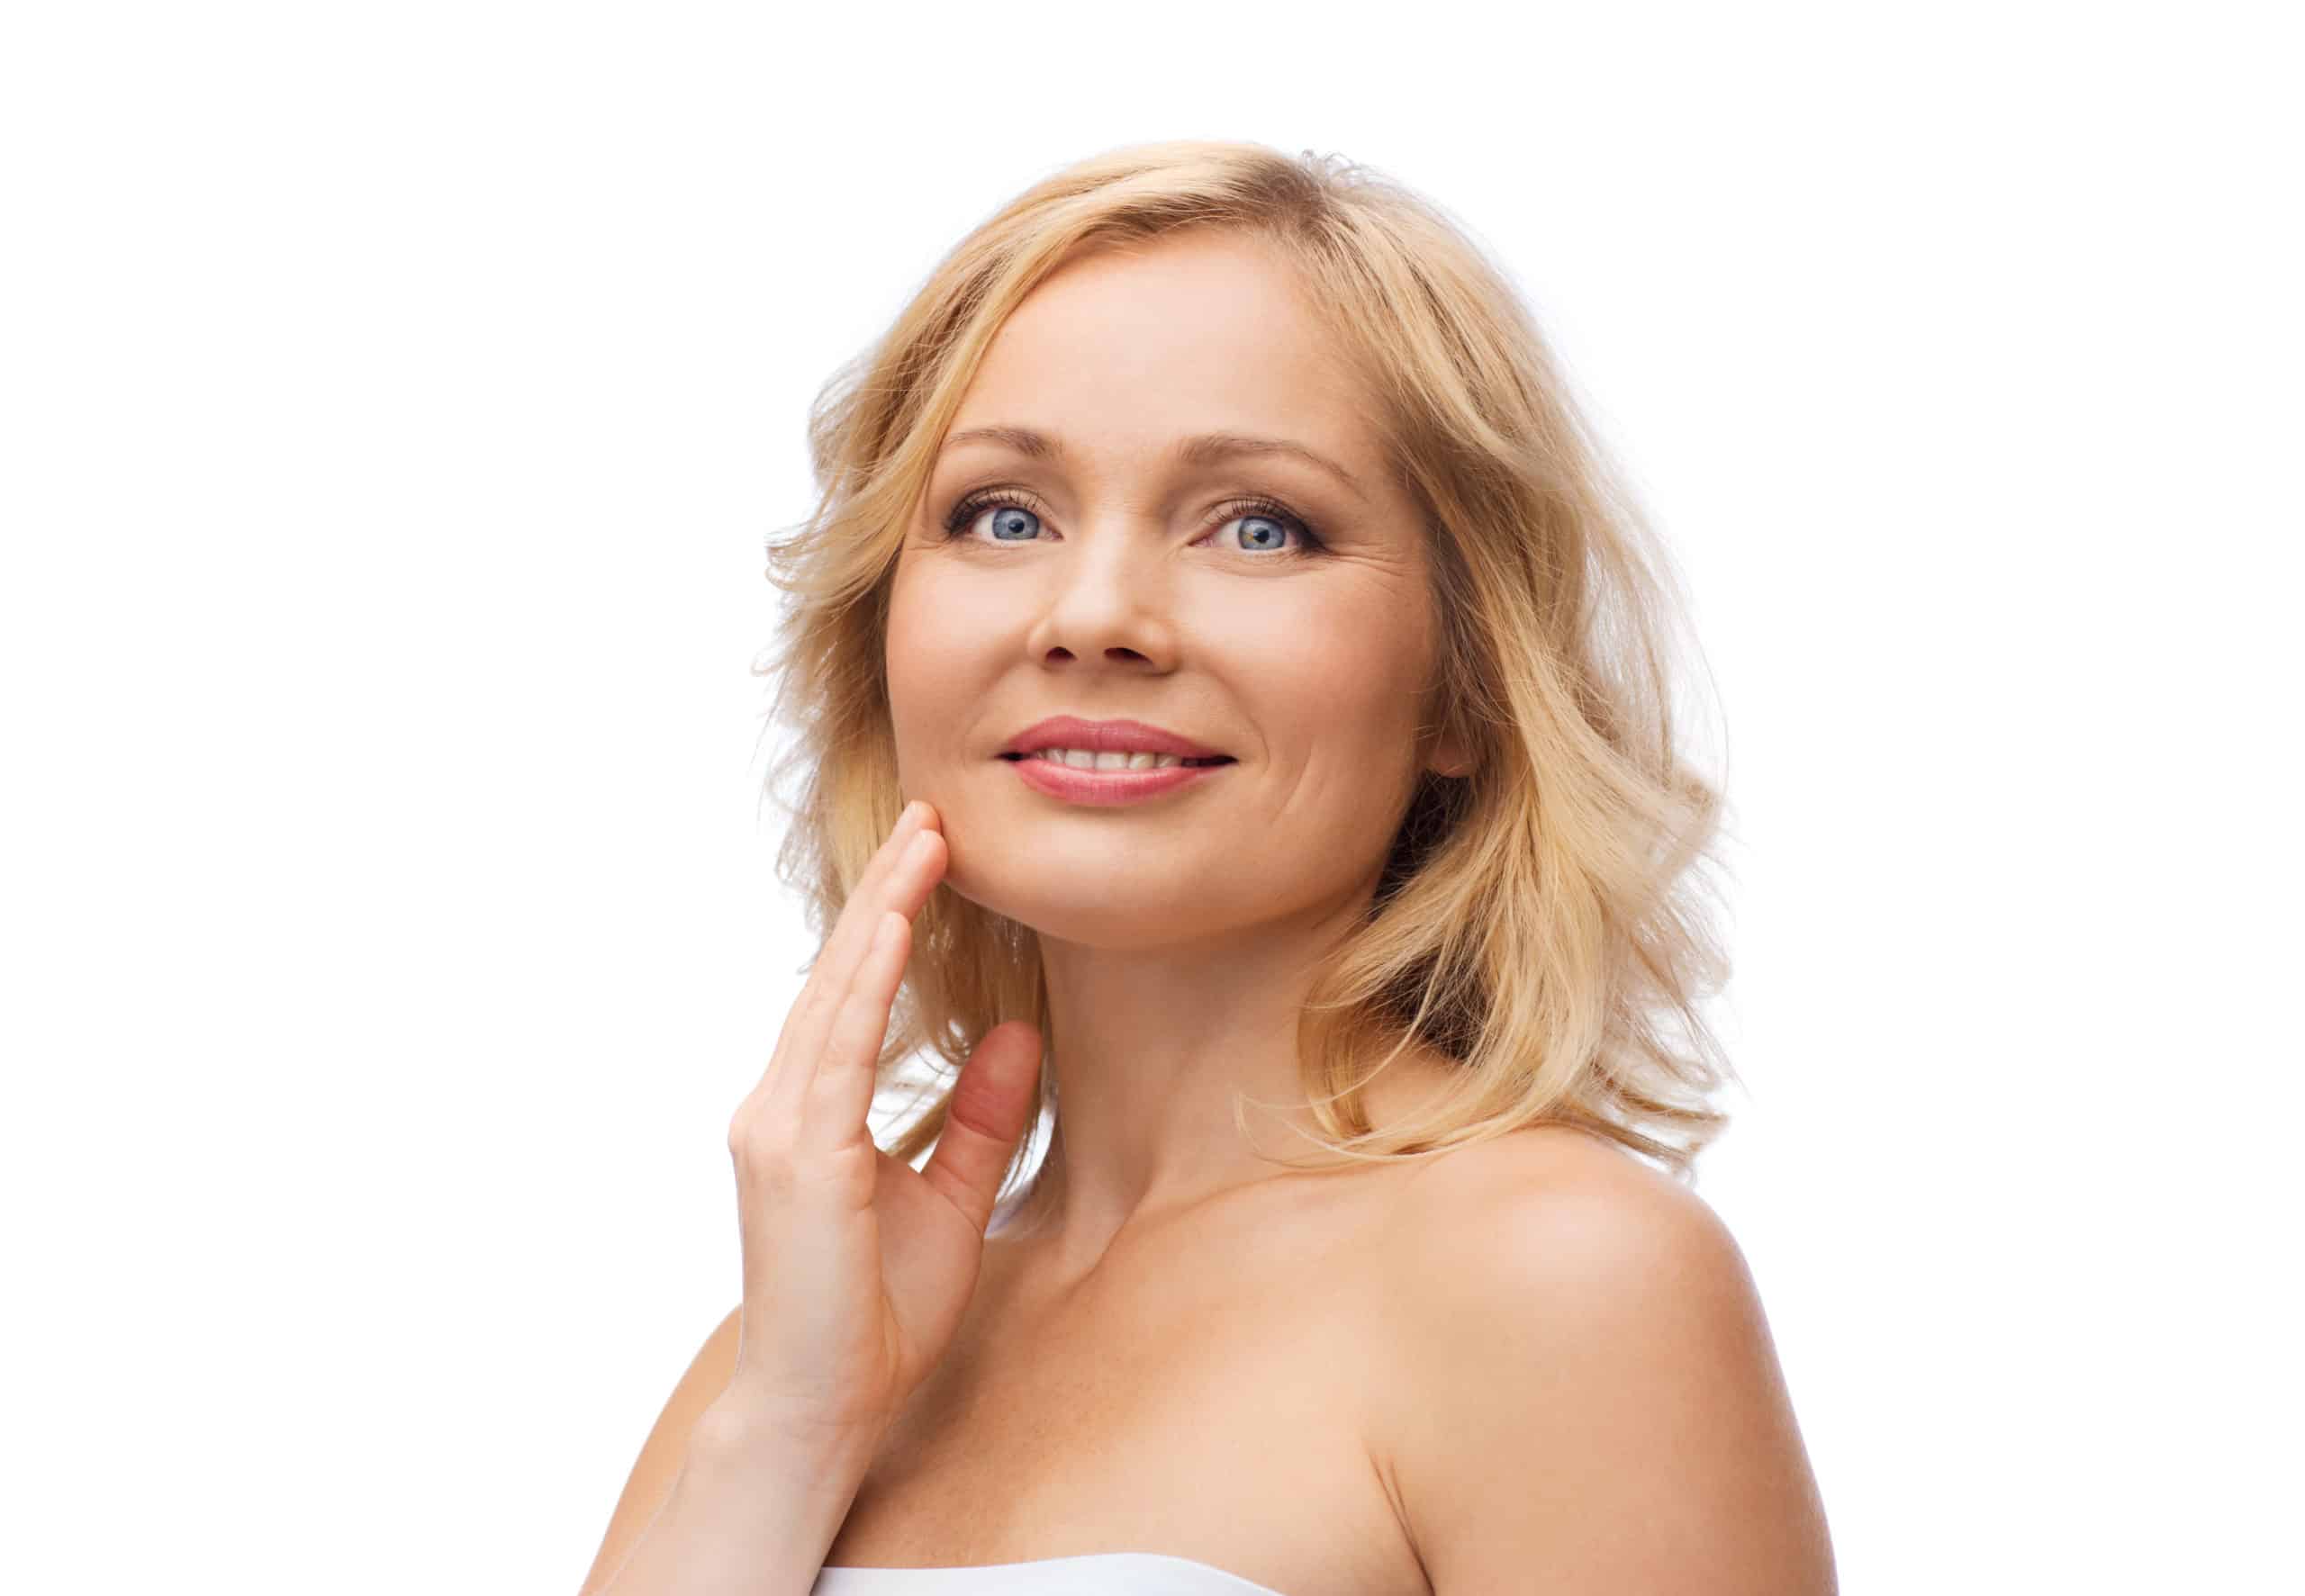 smiling woman with bare shoulders touching face